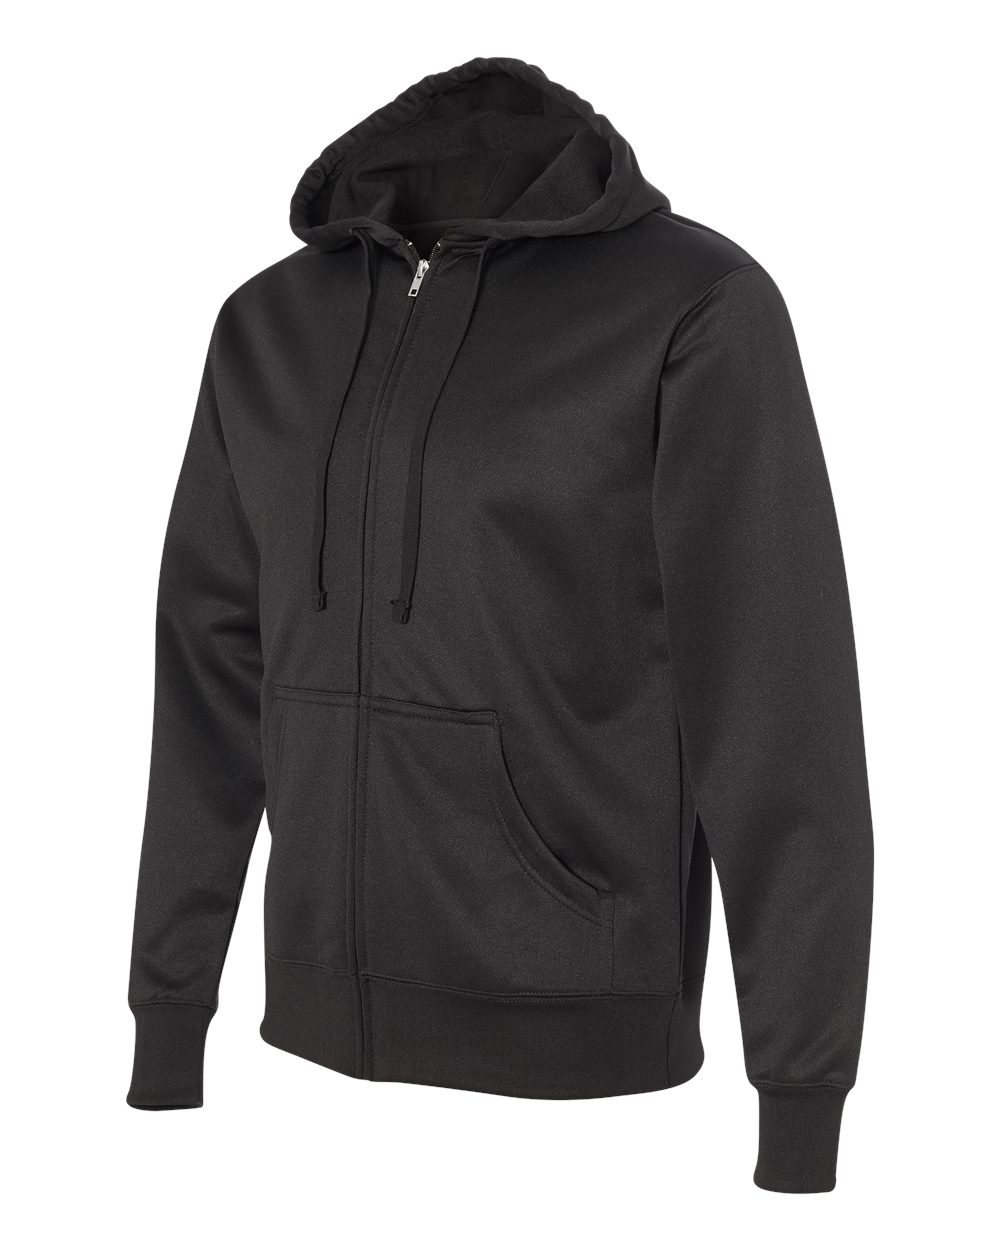 Independent Trading Co. EXP444PZ - Poly Tech Hooded Full Zip Sweatshirt